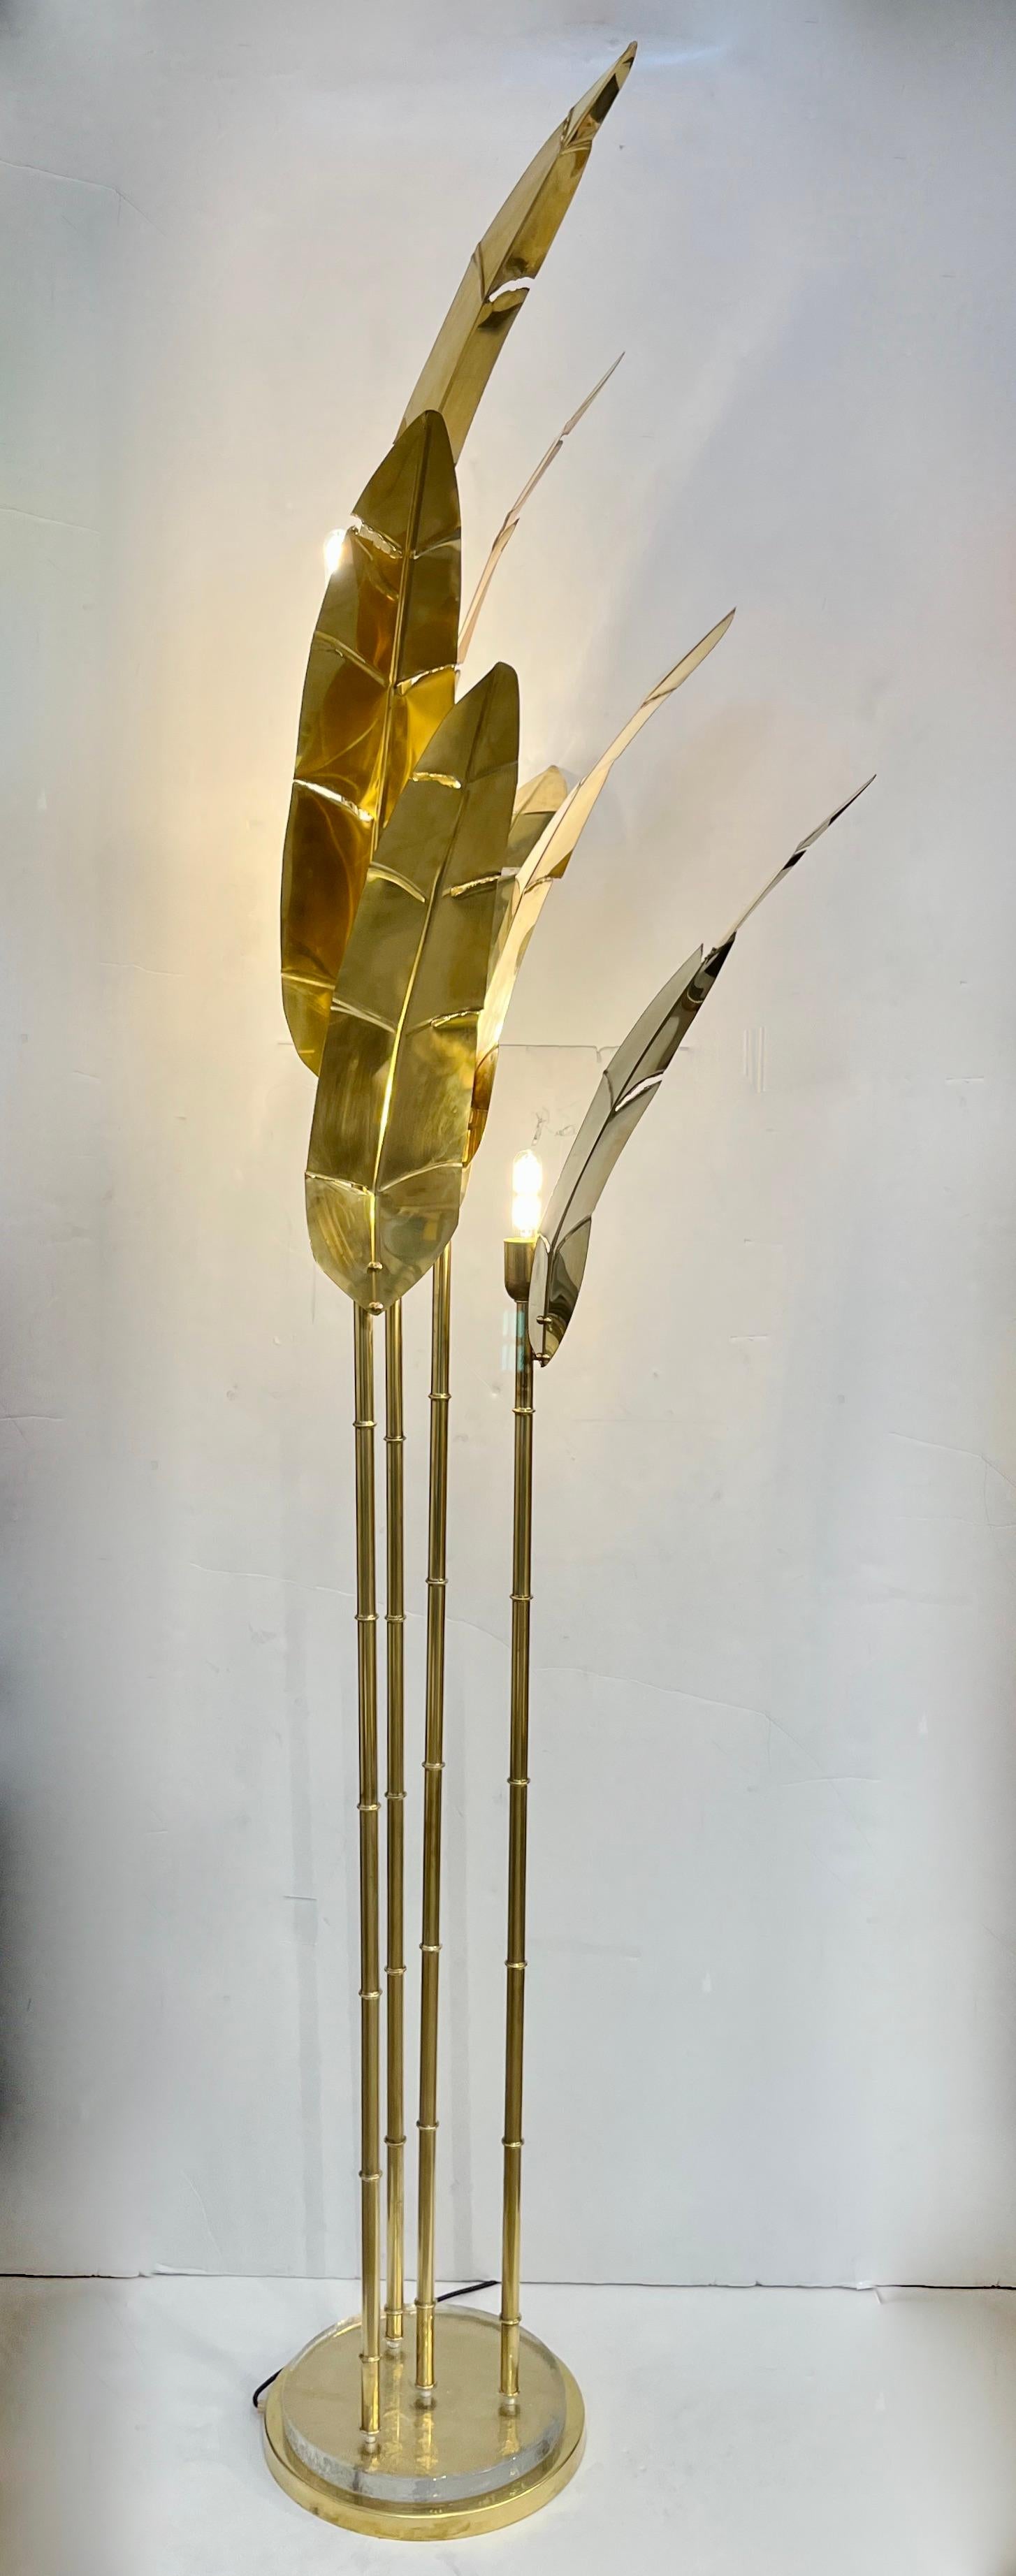 Contemporary Italian Art Deco Design Palm Tree Pair of 7-Leaf Brass Floor Lamps For Sale 3